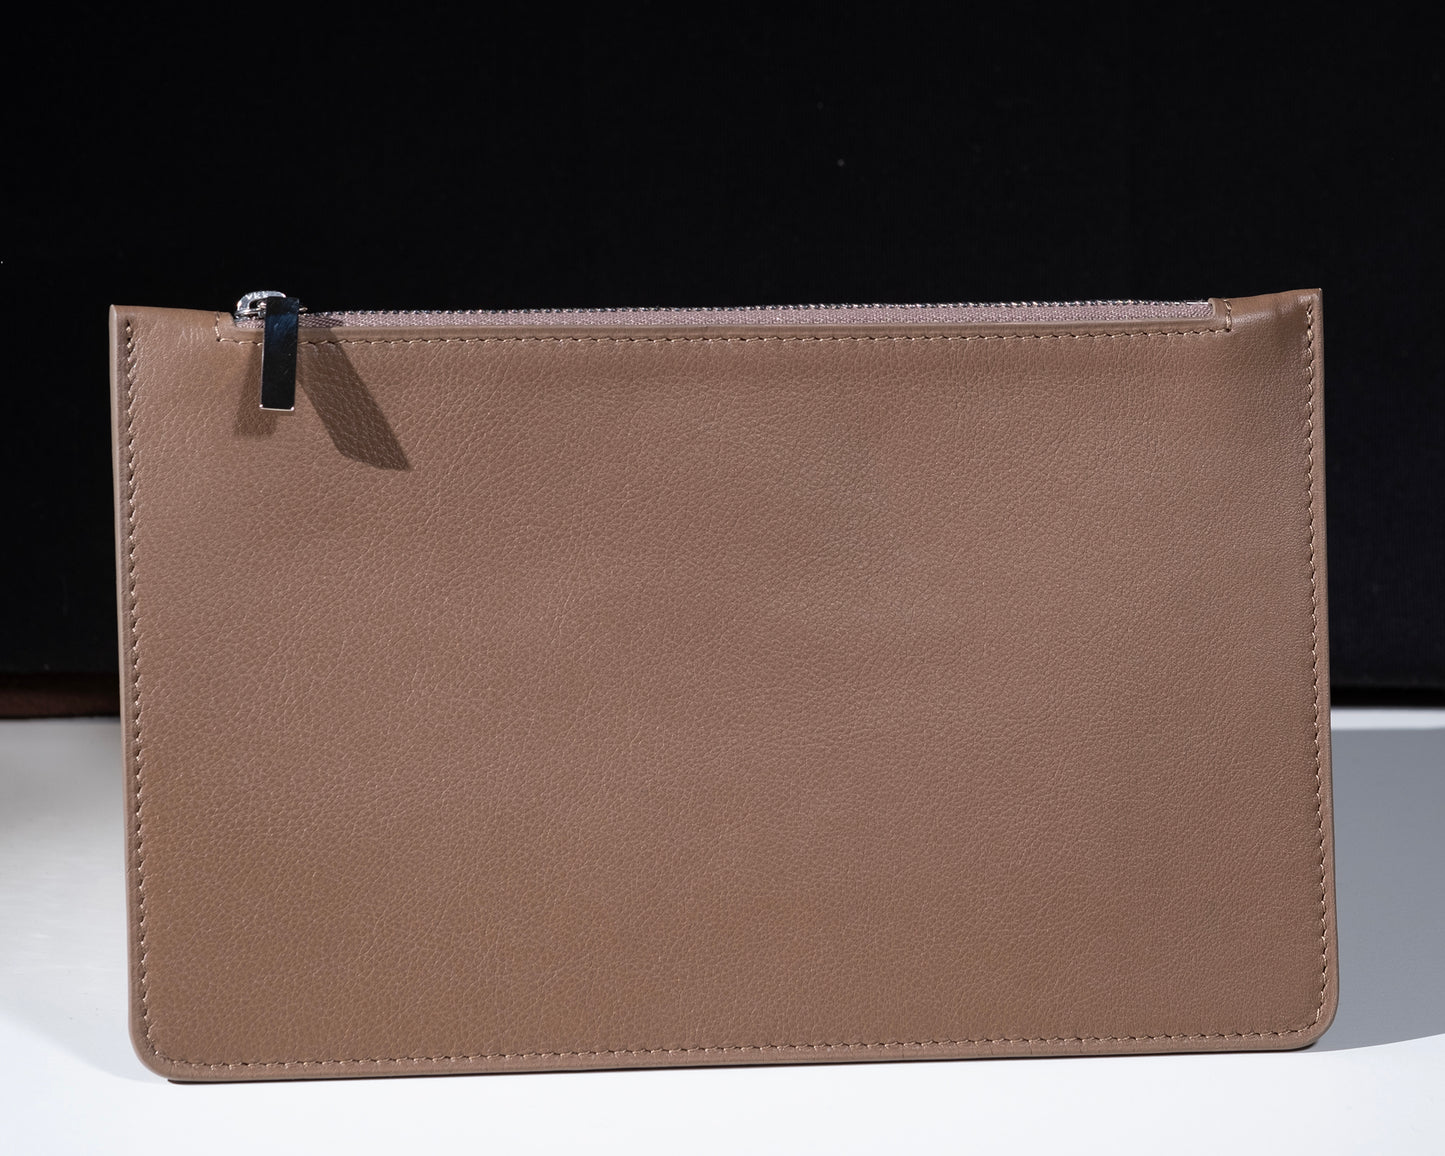 Taupe leather city clutch bag